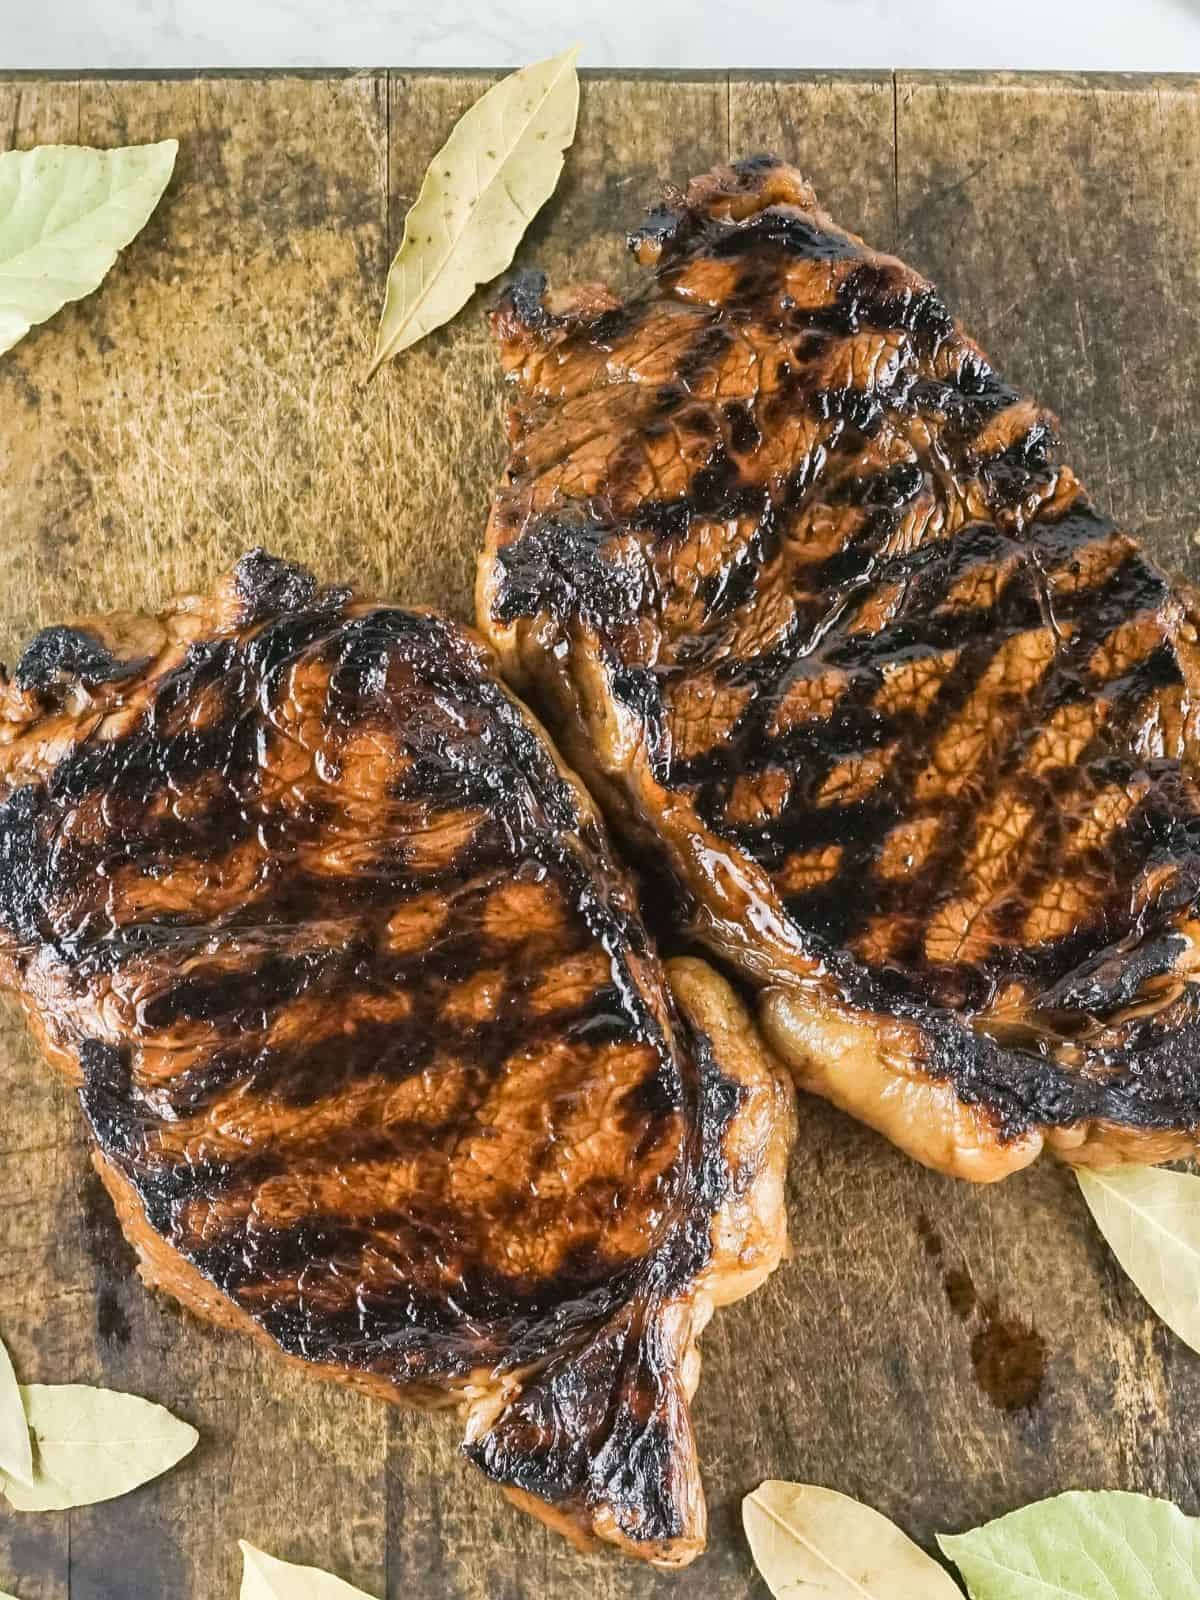 Two grilled steaks on a cutting board.